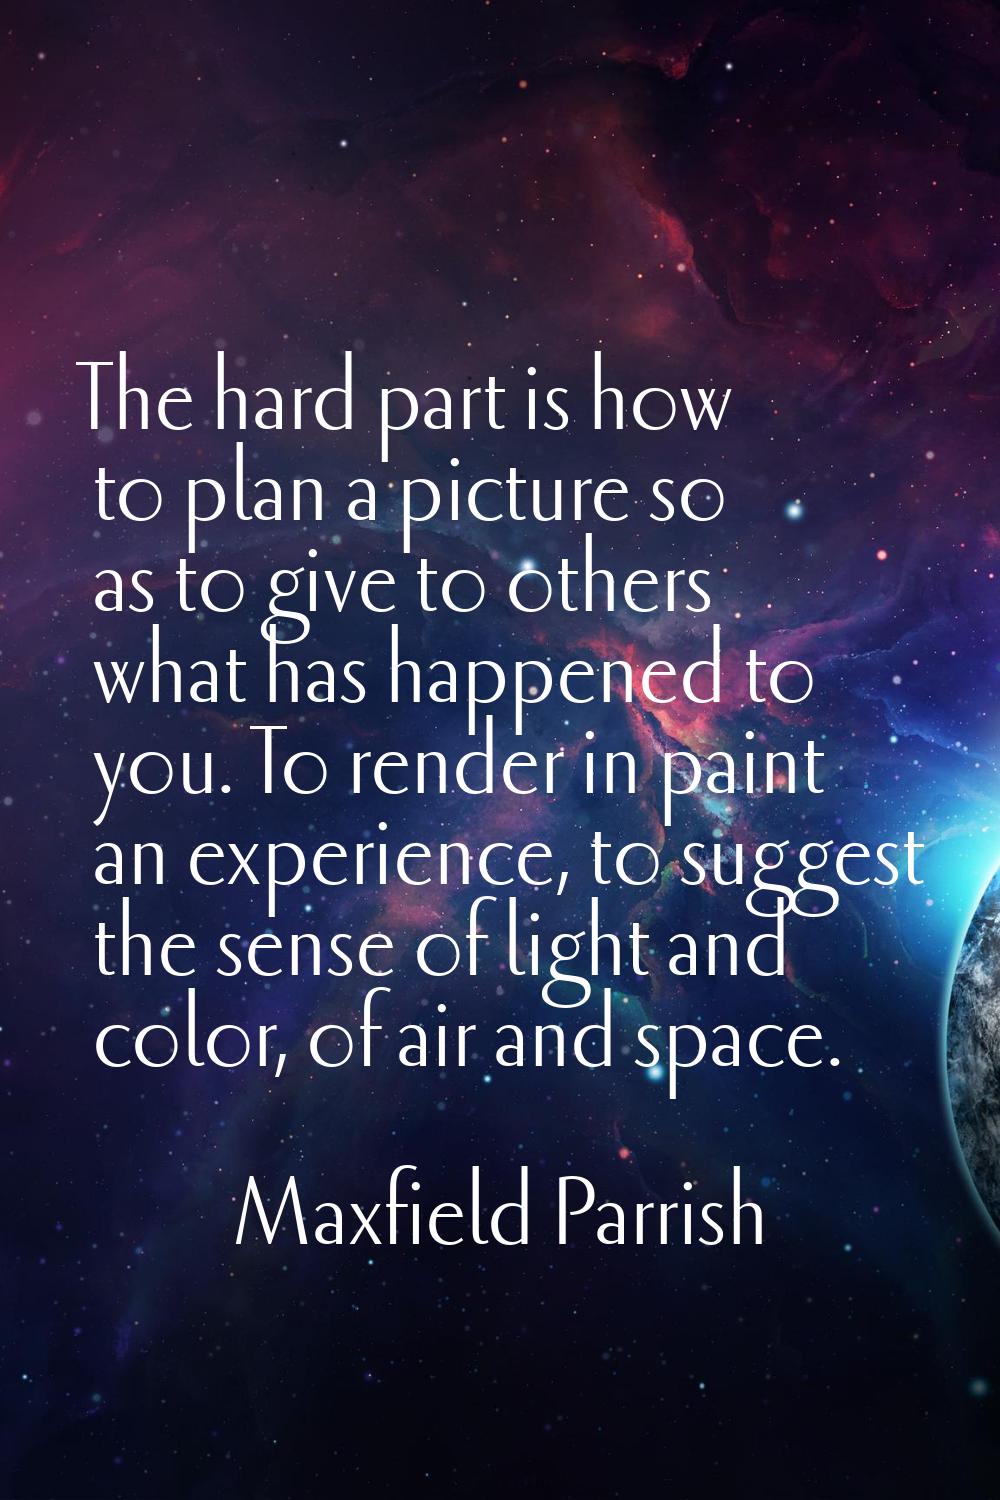 The hard part is how to plan a picture so as to give to others what has happened to you. To render 